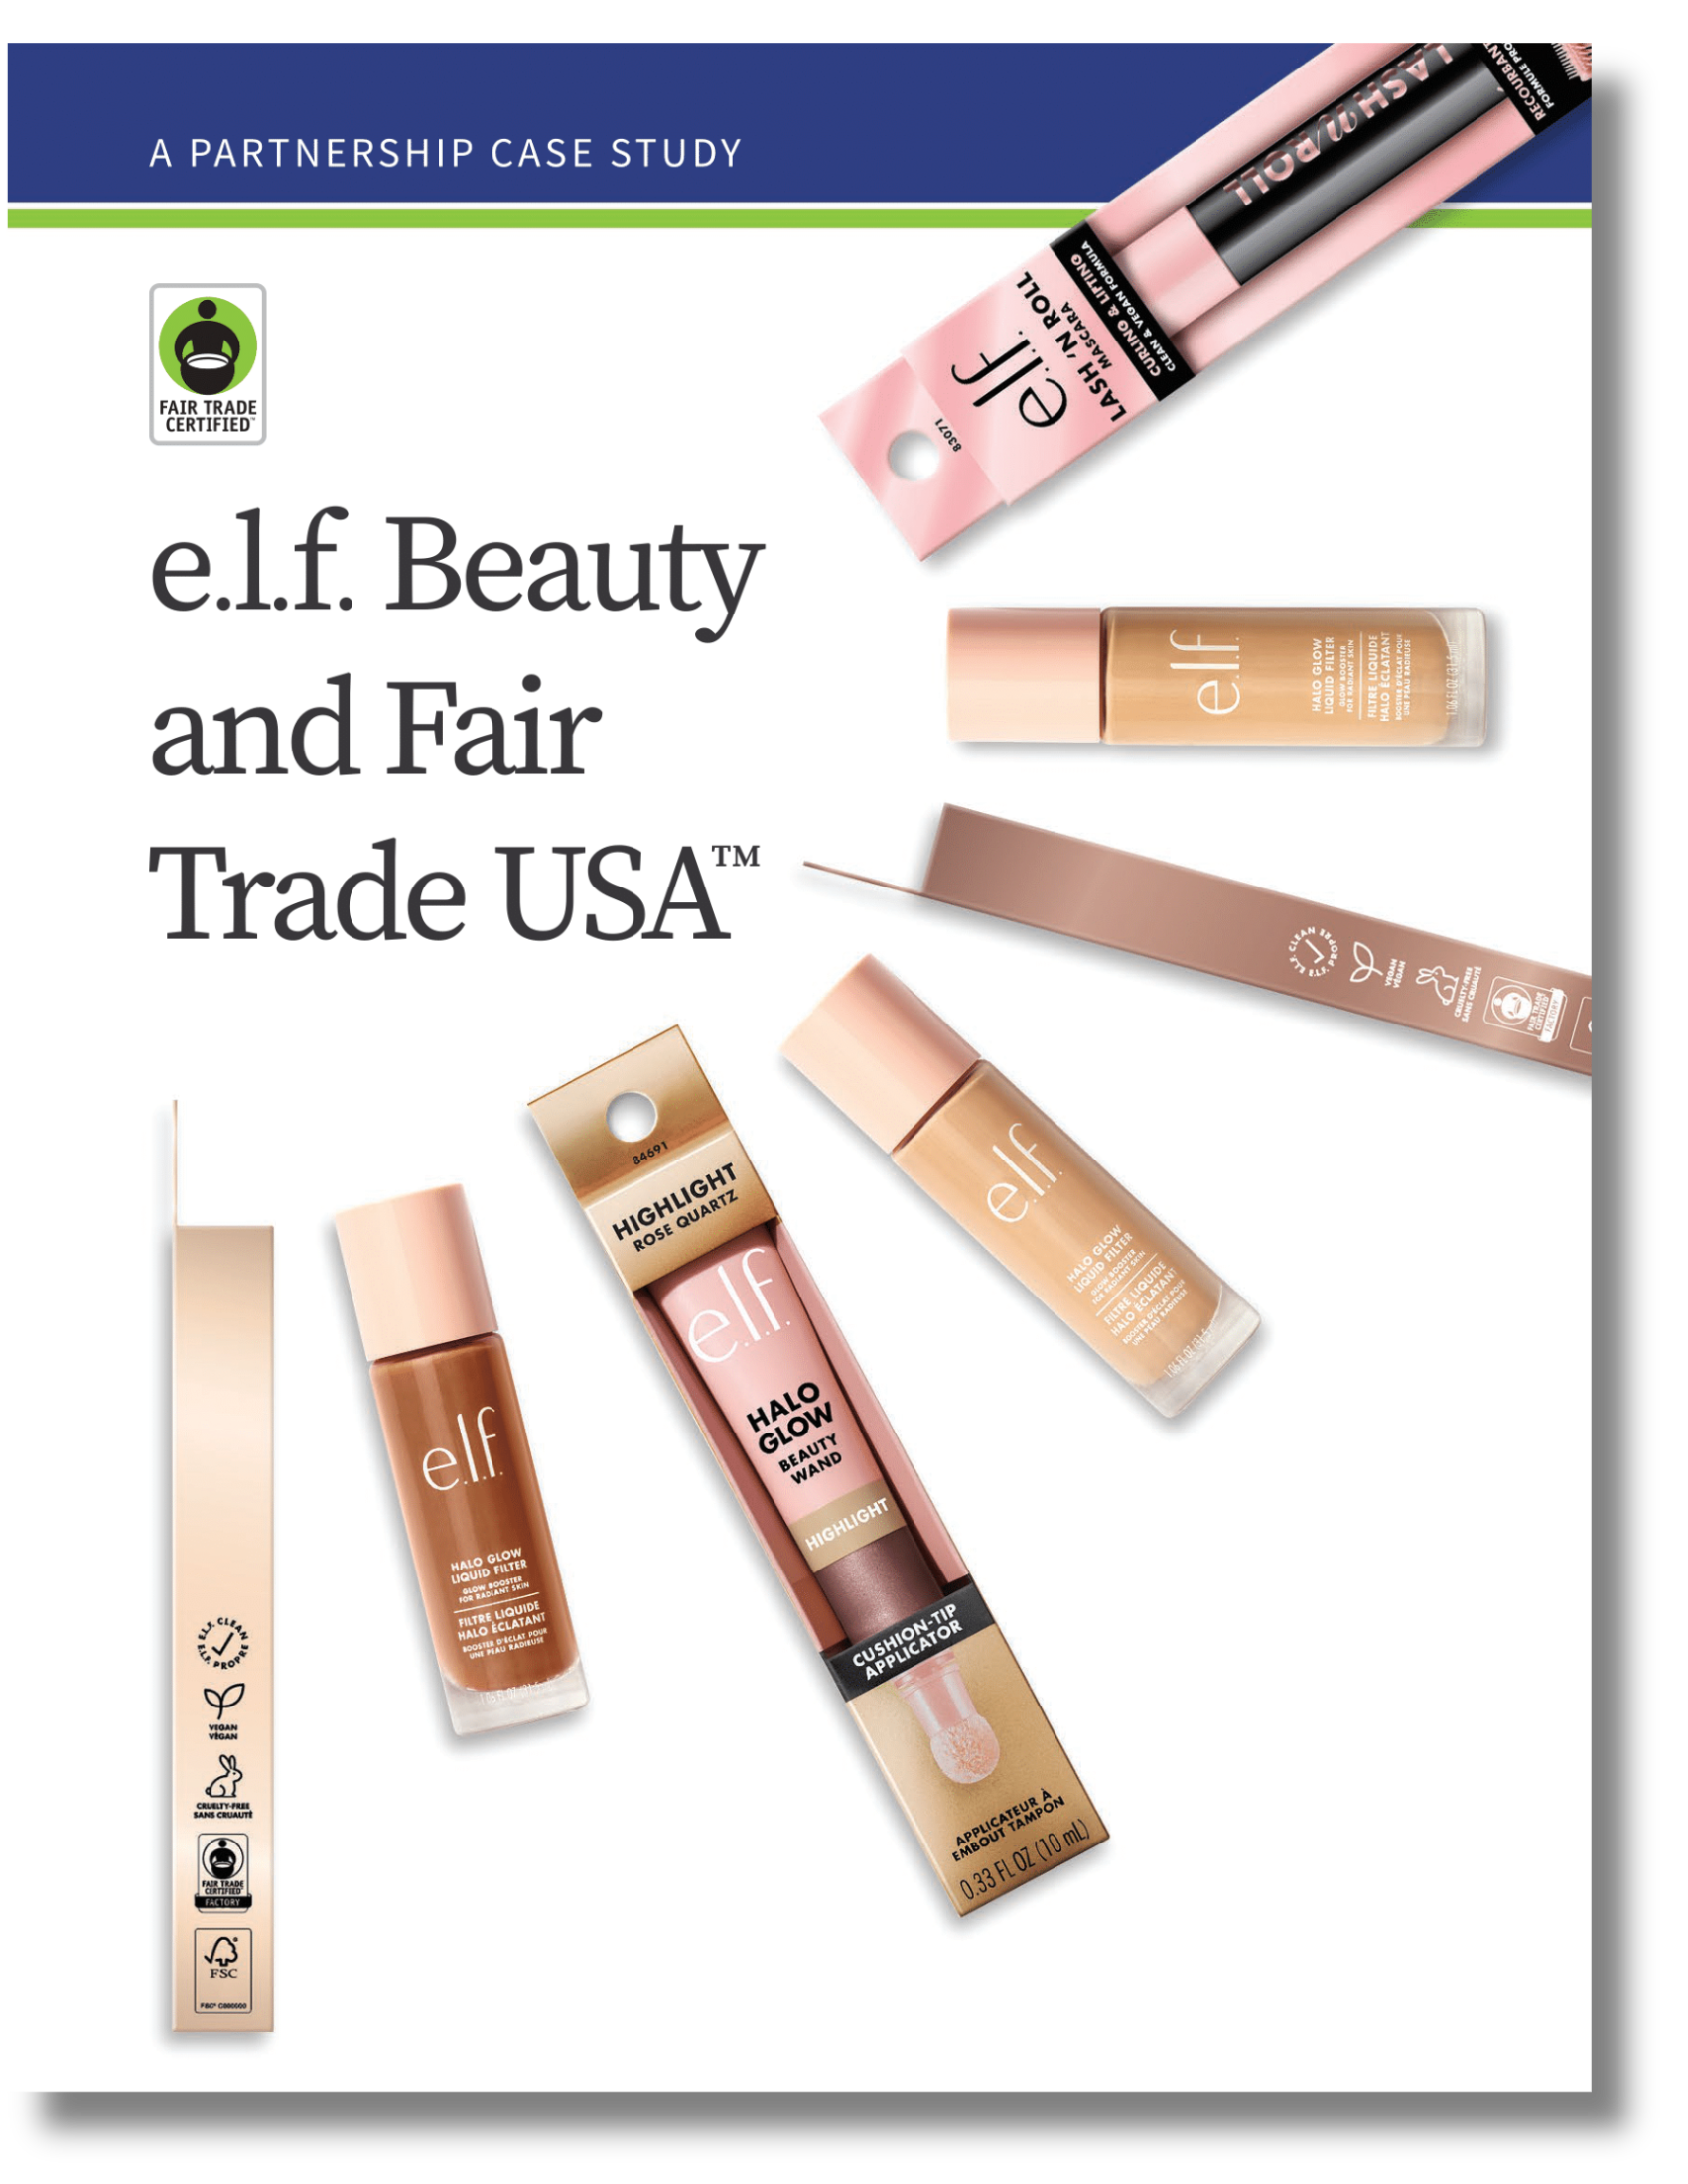 Fair Trade Certified and elf Beauty Case Study - Report Cover